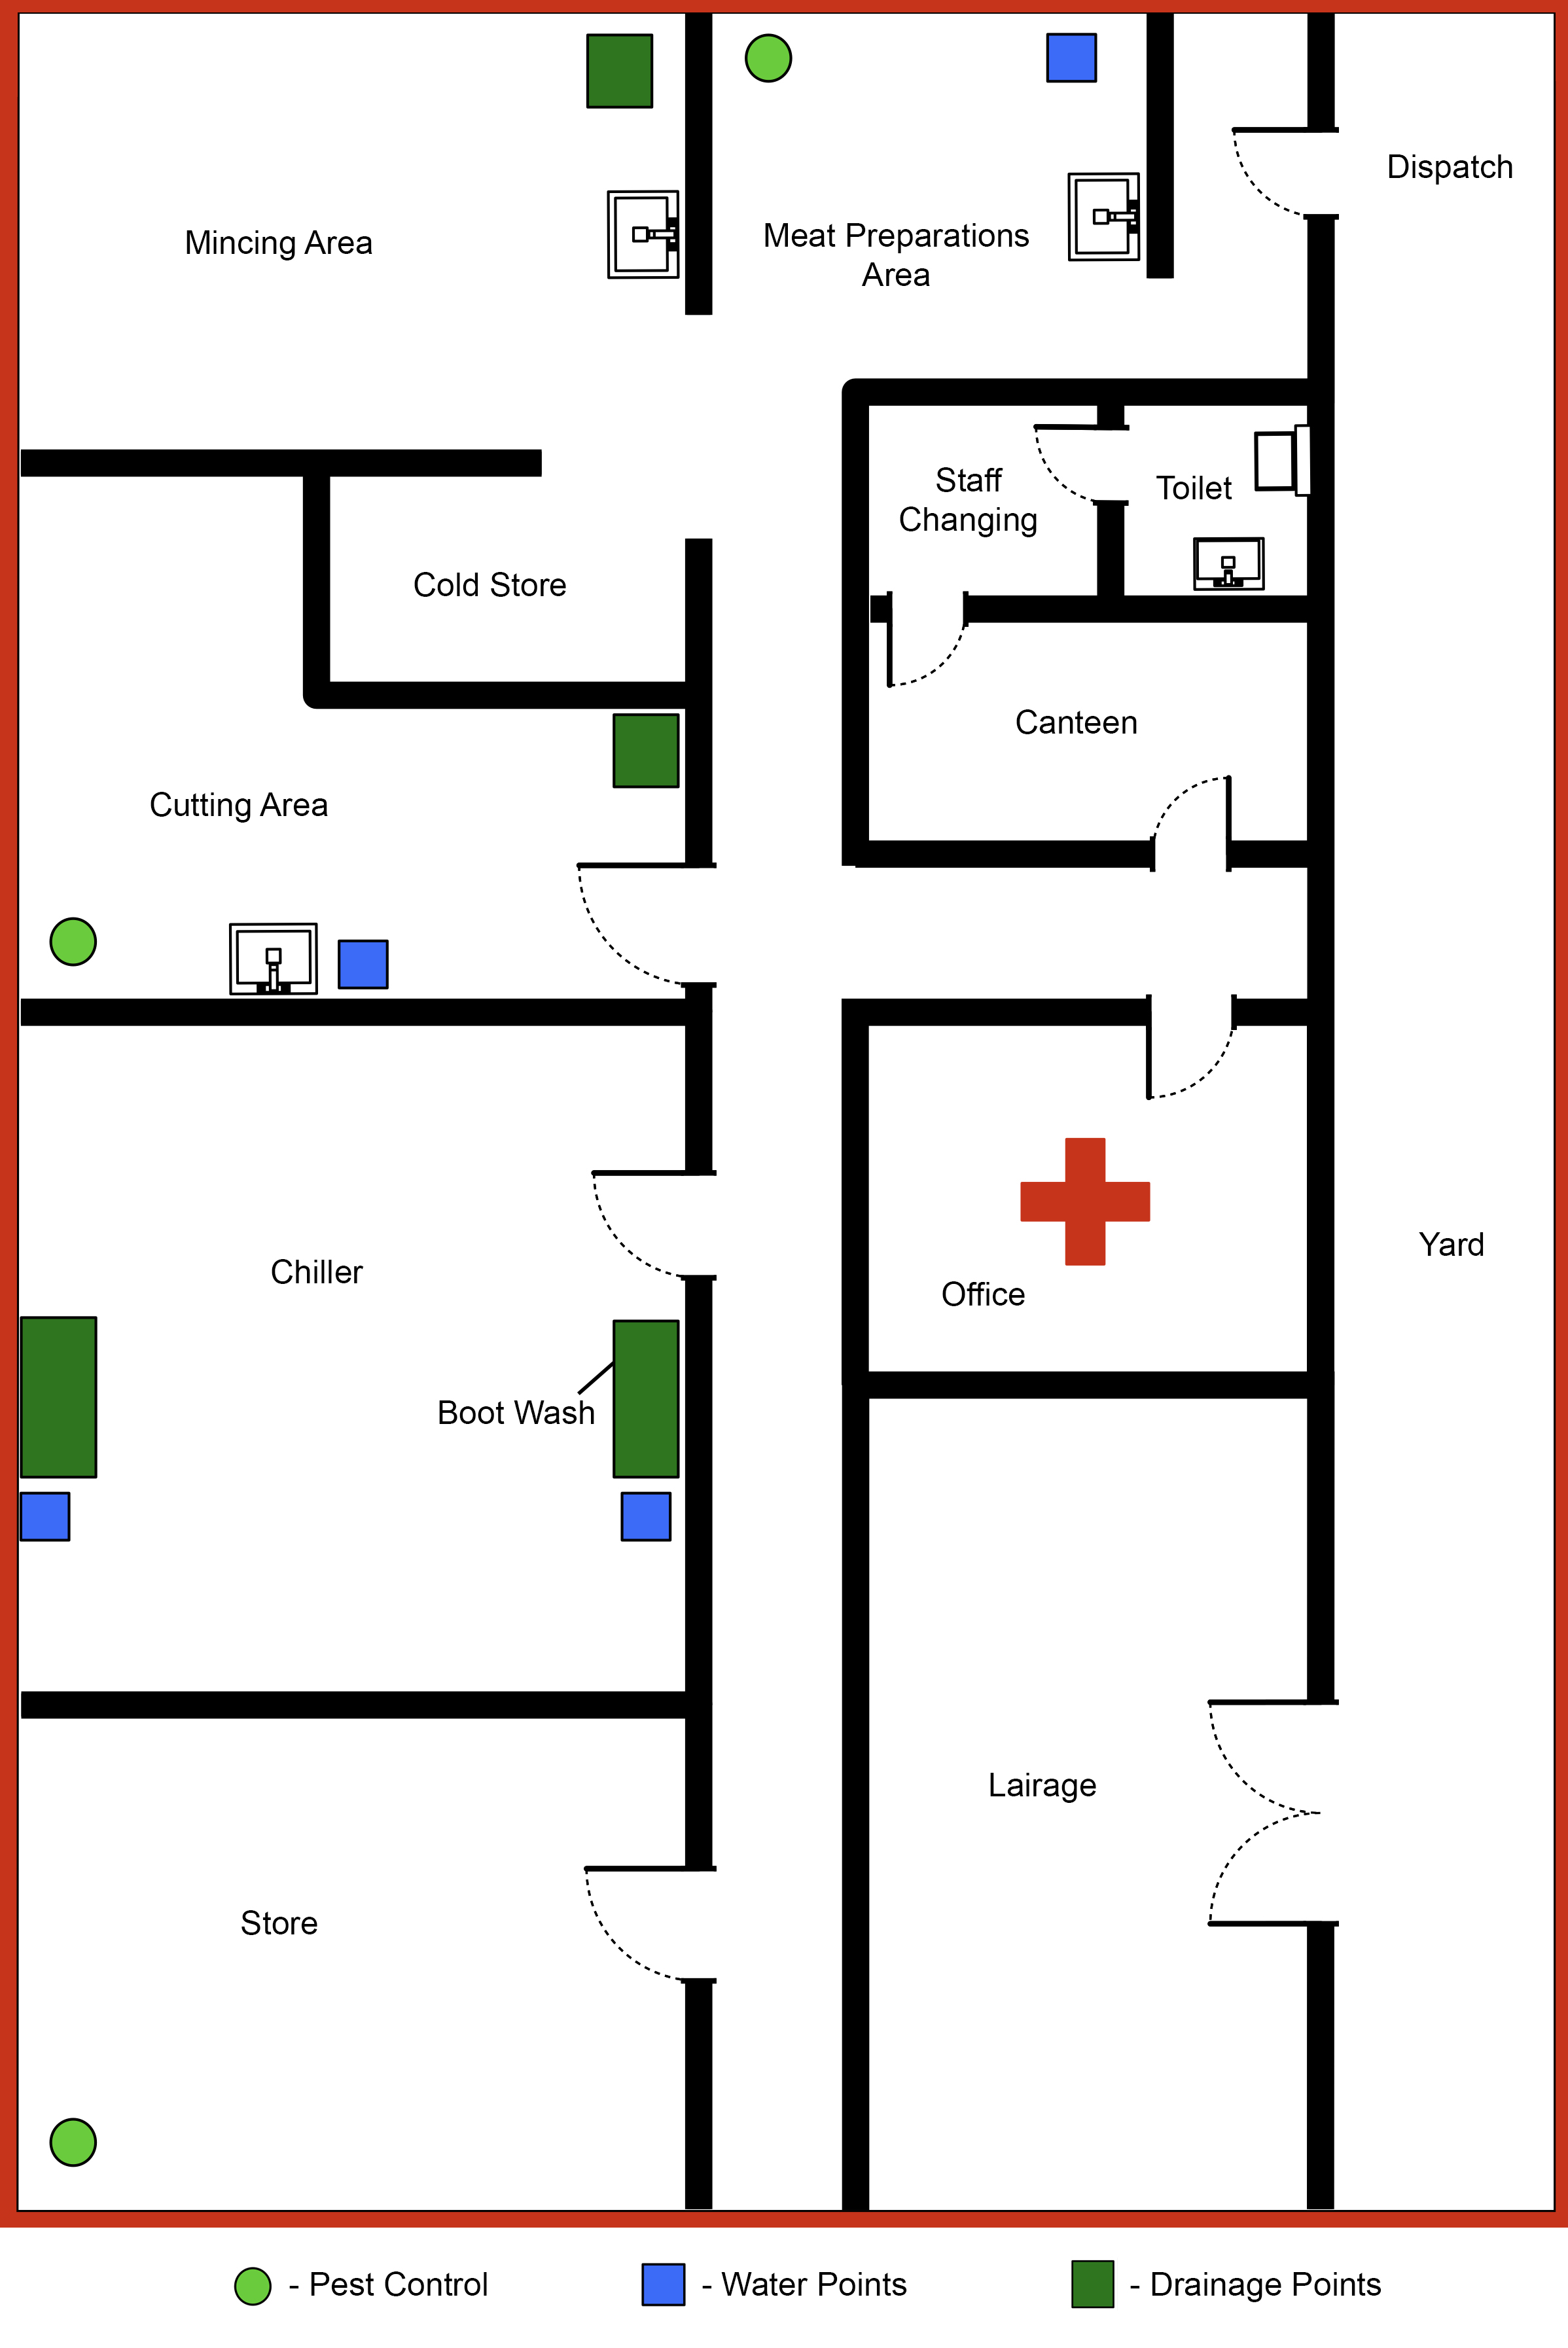 Layout plan with red boundary encompassing all areas. Rooms outlined in black labelled mincing area, meat preparation area, dispatch, cold store, staff changing, toilet, canteen, chiller, office, store, lairage and yard. Pest control, water and drainage points marked. 